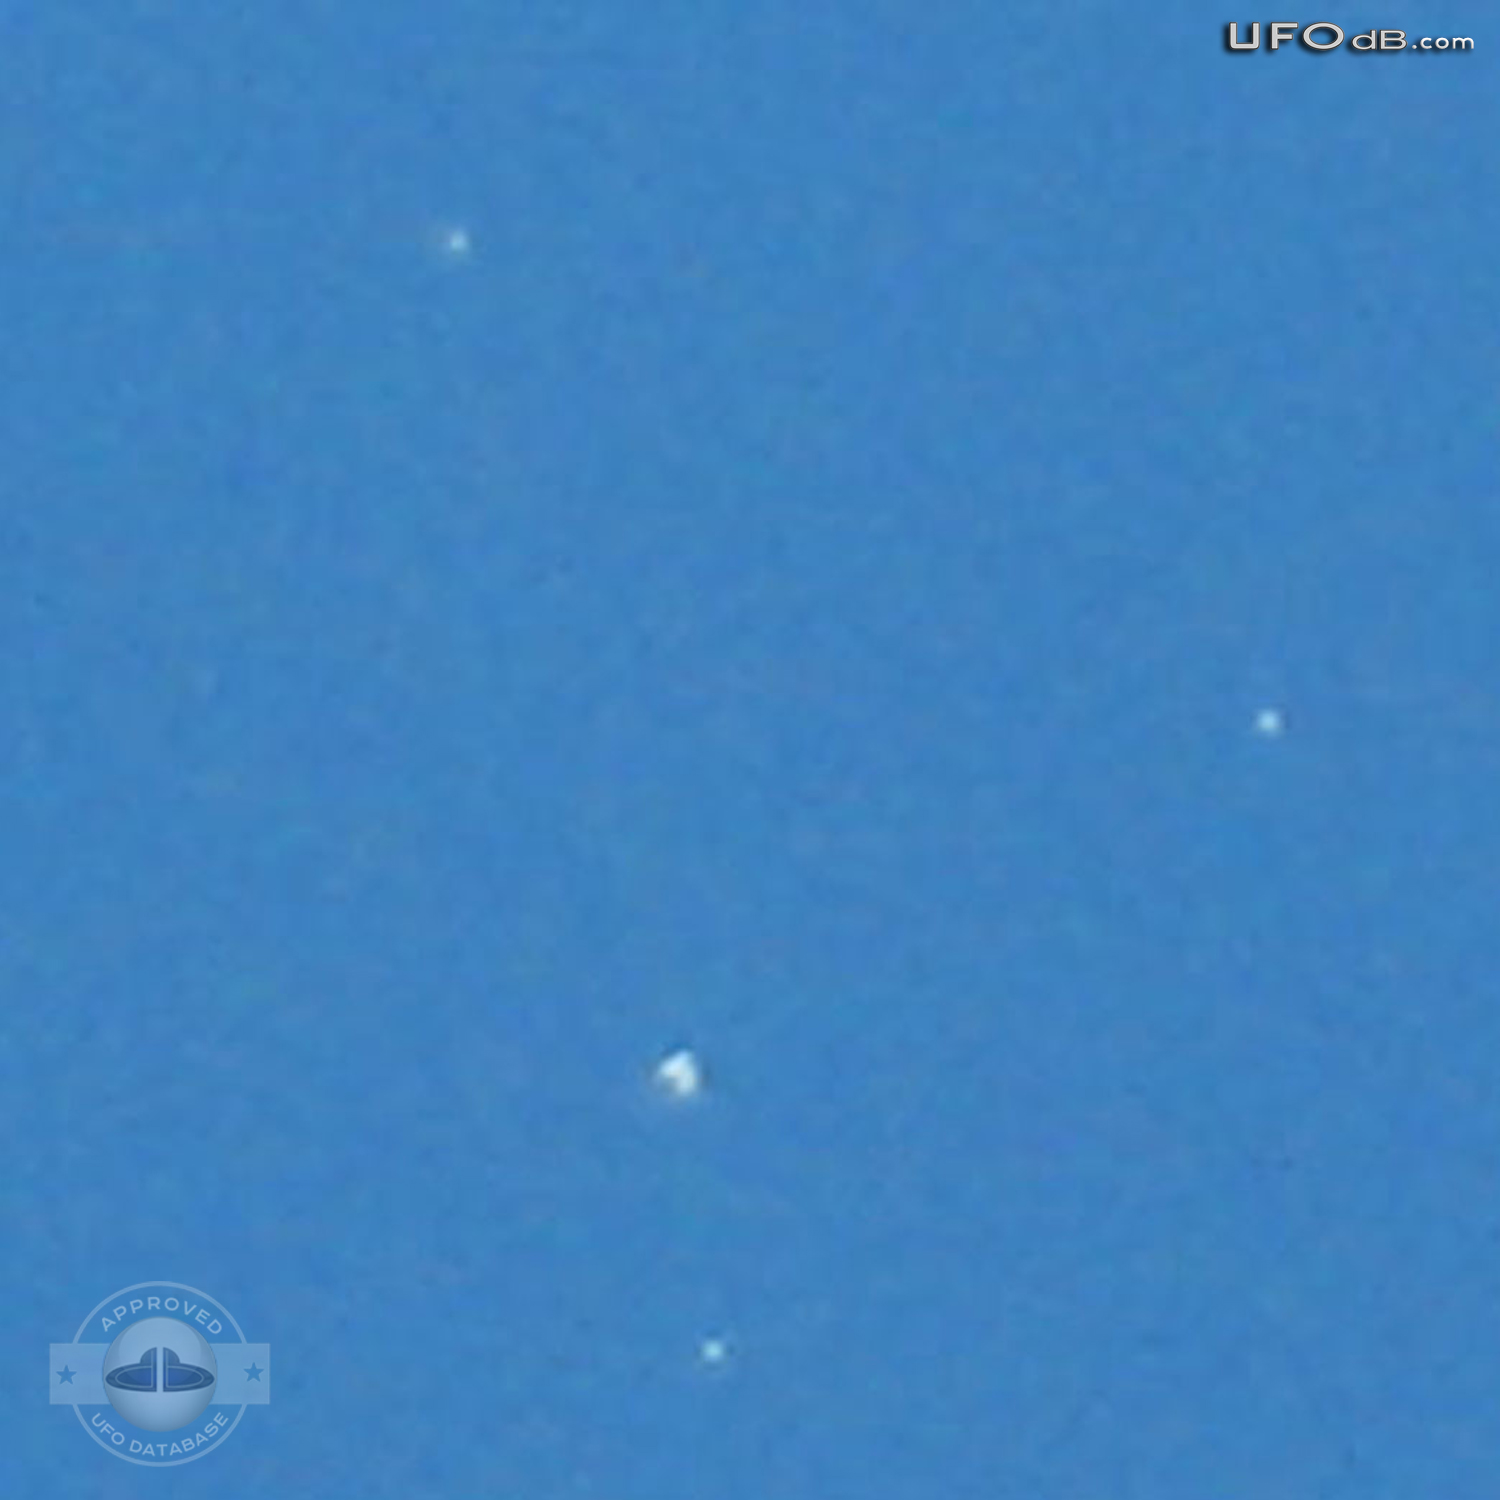 Five Apparent UFOs in the sky of Portland | Oregon, USA | May 1 2011 UFO Picture #314-2